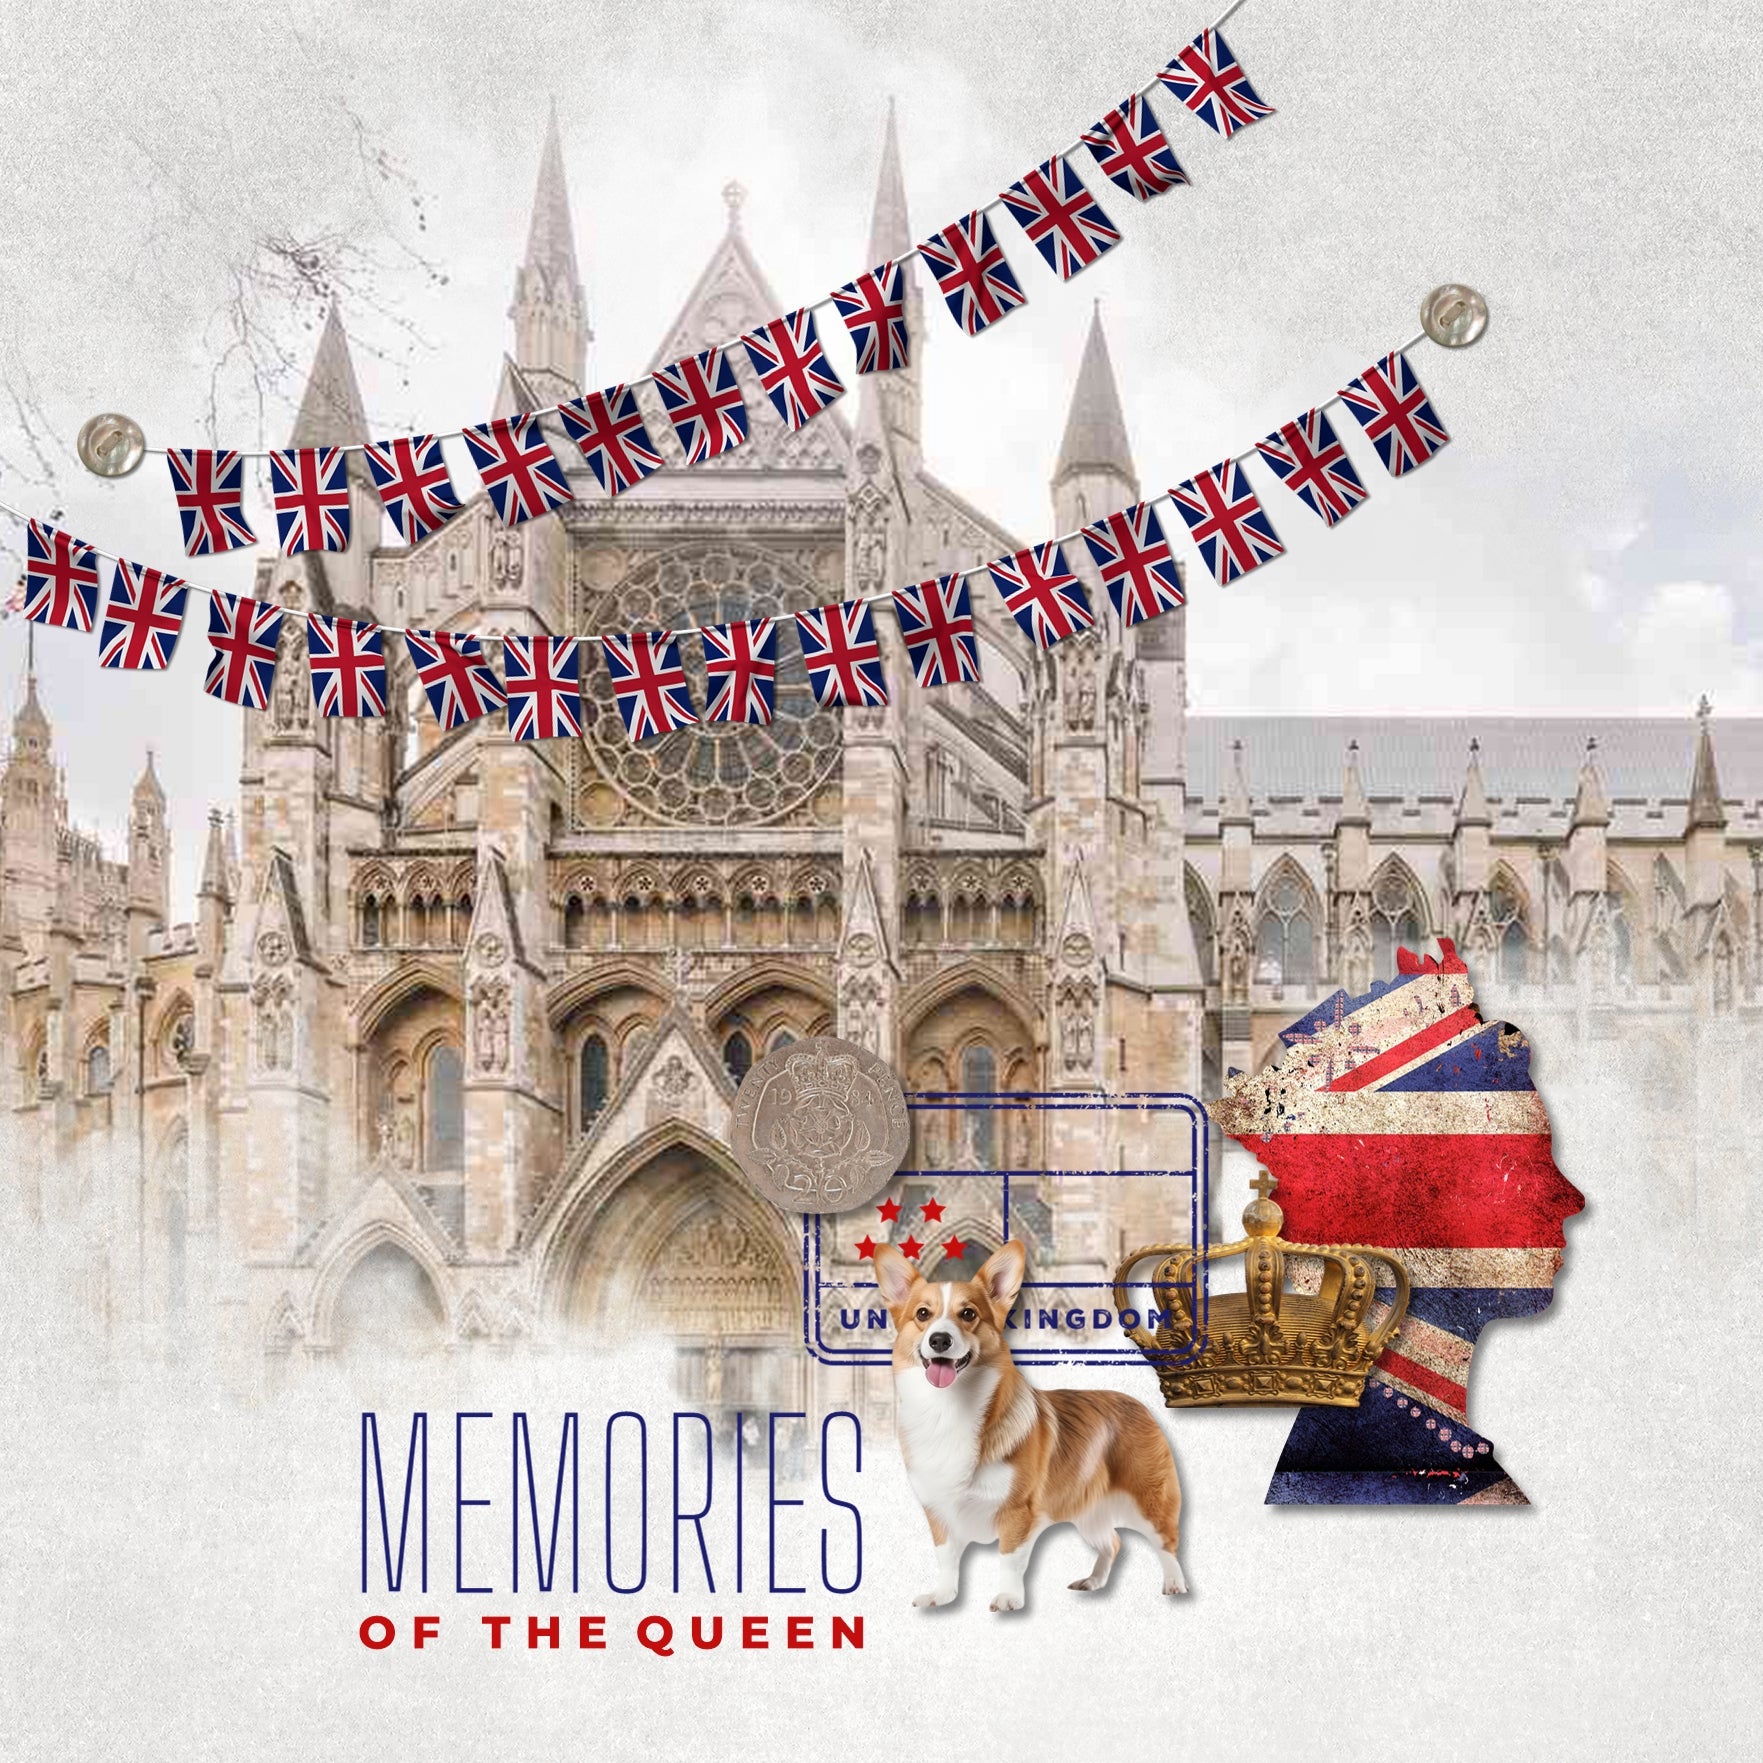 Celebrate the United Kingdom, England, Scotland, Northern Ireland, Wales, and all of Europe with these beautiful landmark and scenic masked overlays by Lucky Girl Creative! With transparent edges, these masked photographs blend seamlessly into any background paper and make the perfect backdrop for all travel, vacation, and holiday pages.